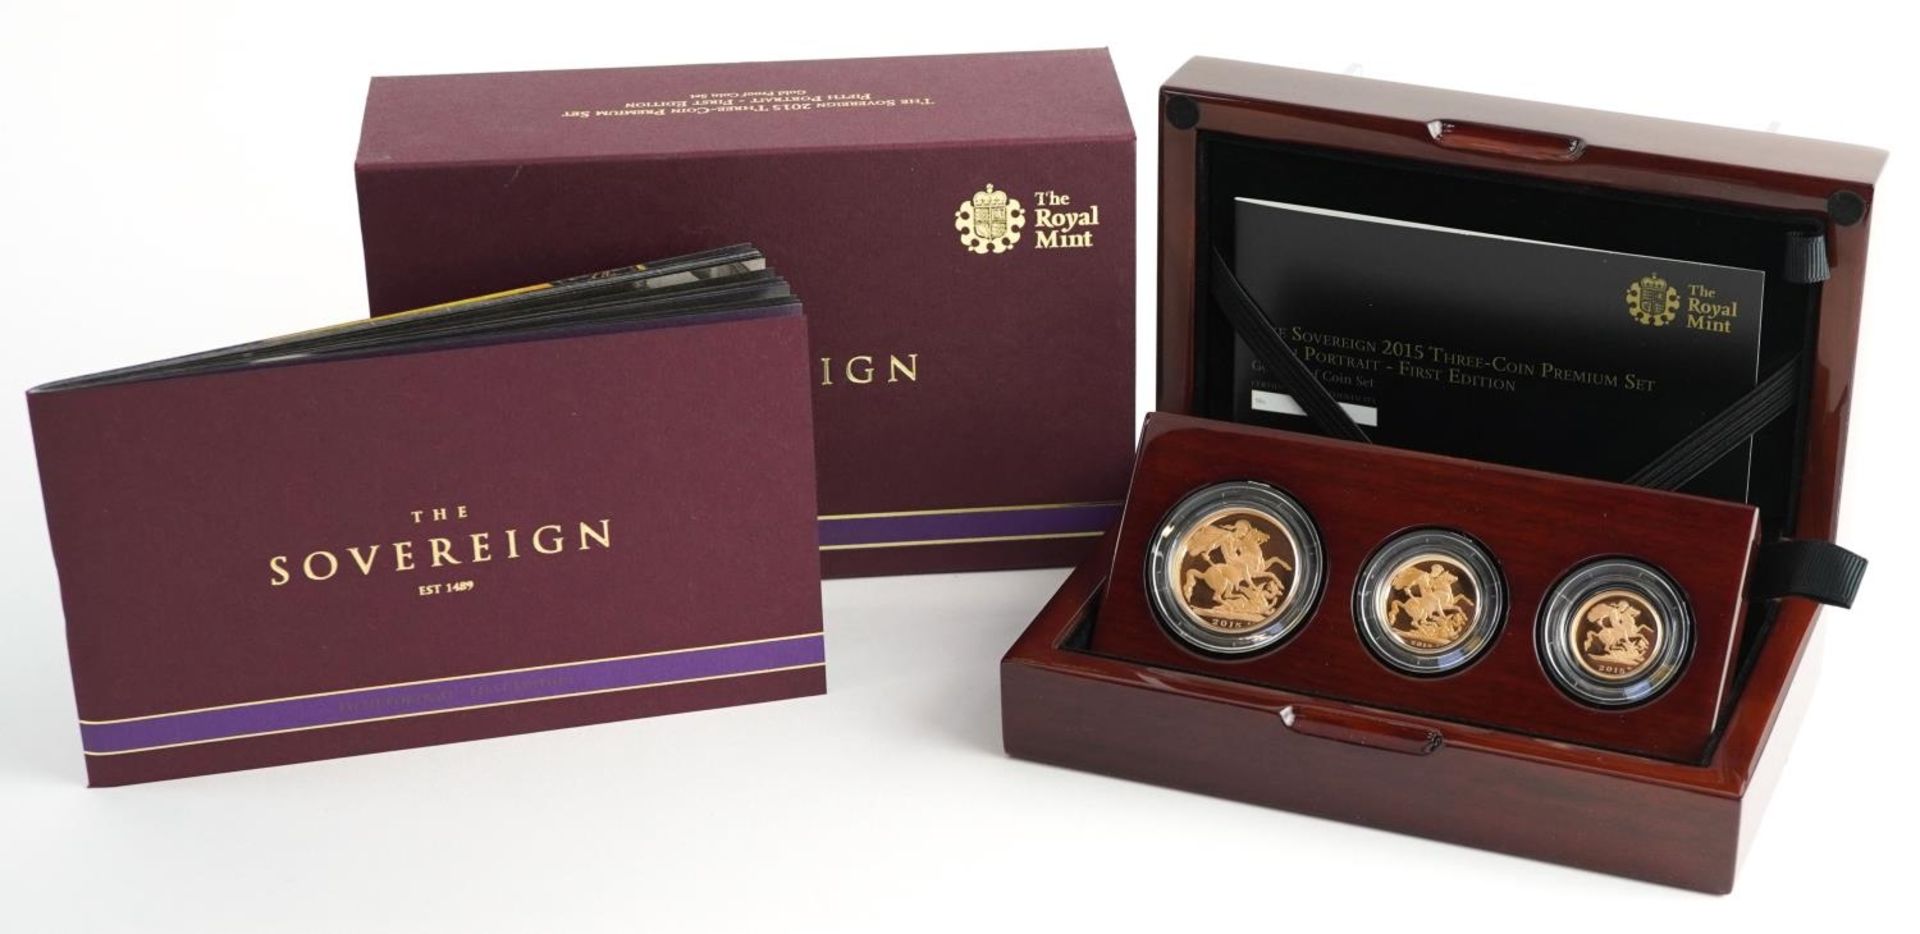 Elizabeth II 2015 sovereign Three-Coin Premium set by The Royal Mint comprising double sovereign,